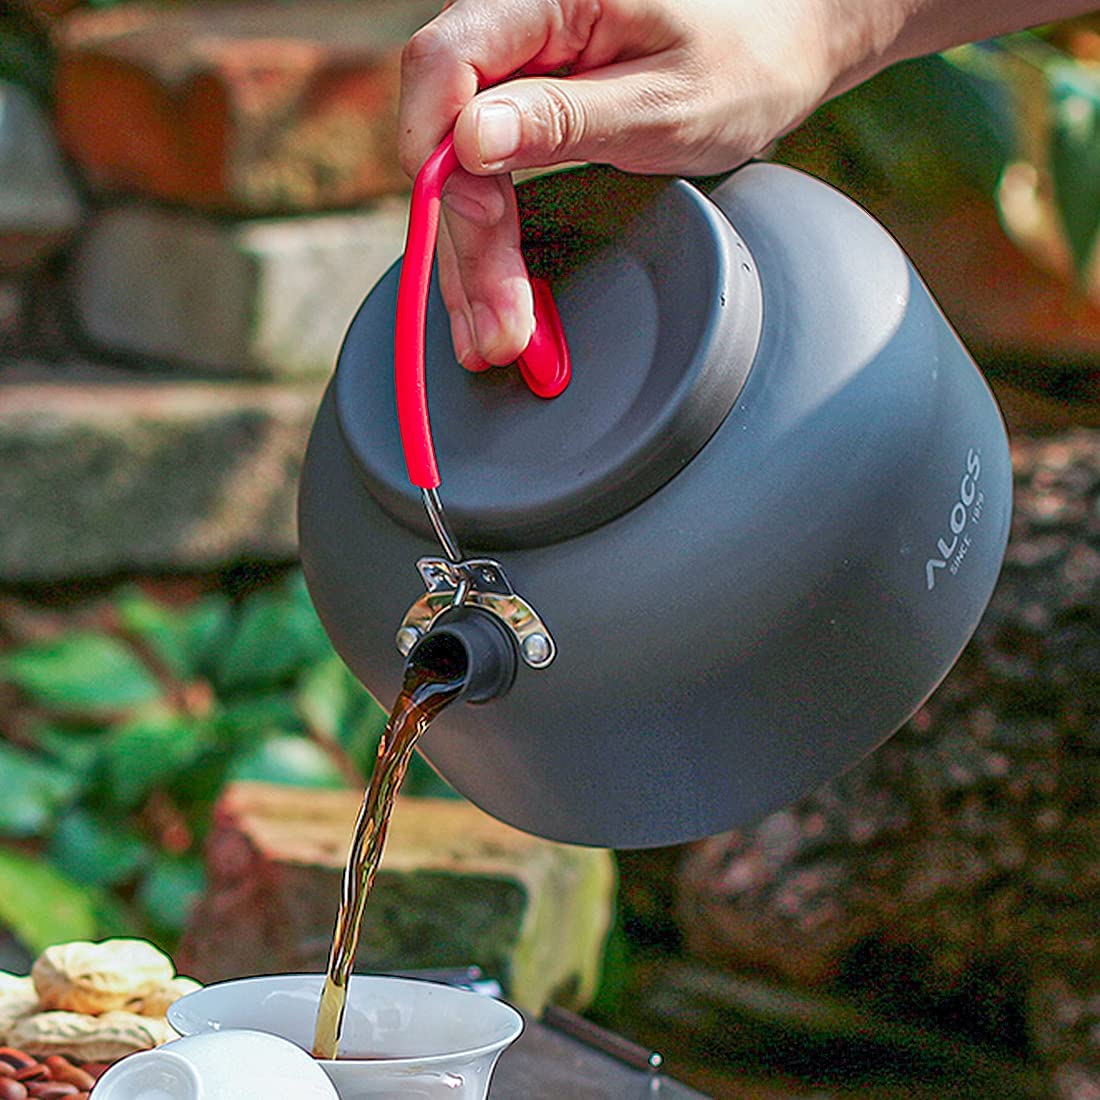 Camping Kettle With Alcohol Stove Set